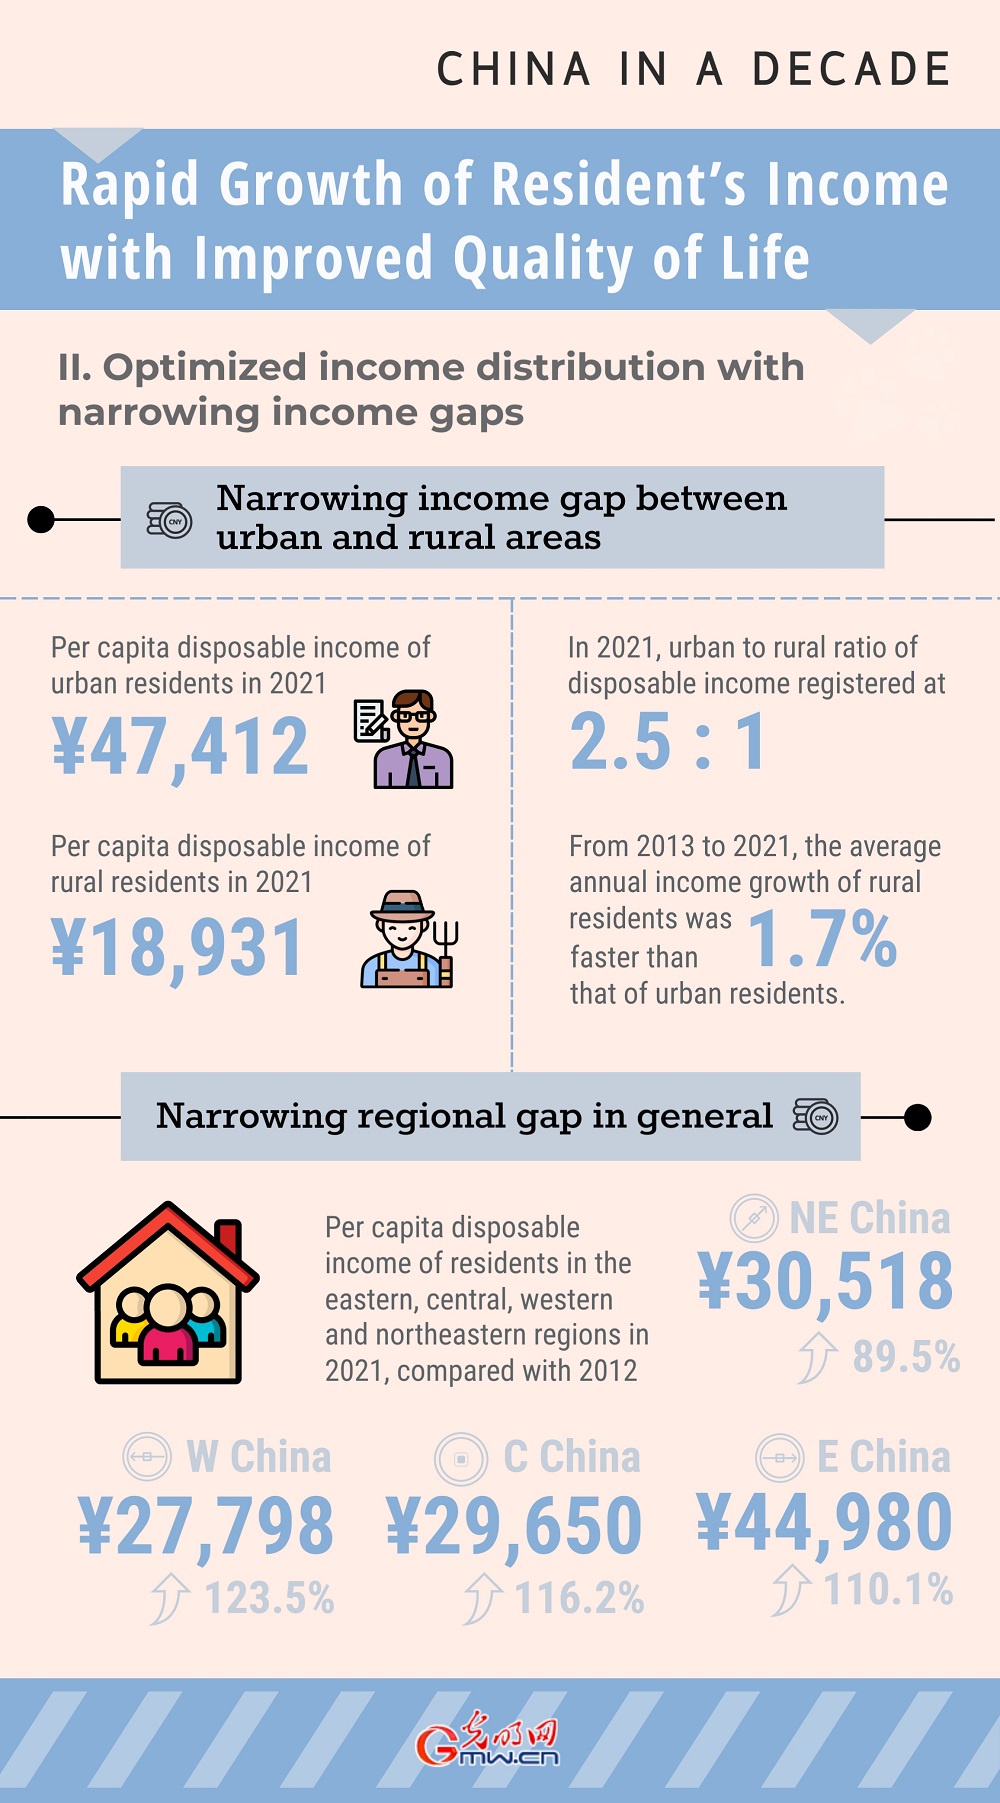 China in a Decade: Rapid Growth of Resident's Income with Improved Quality of Life